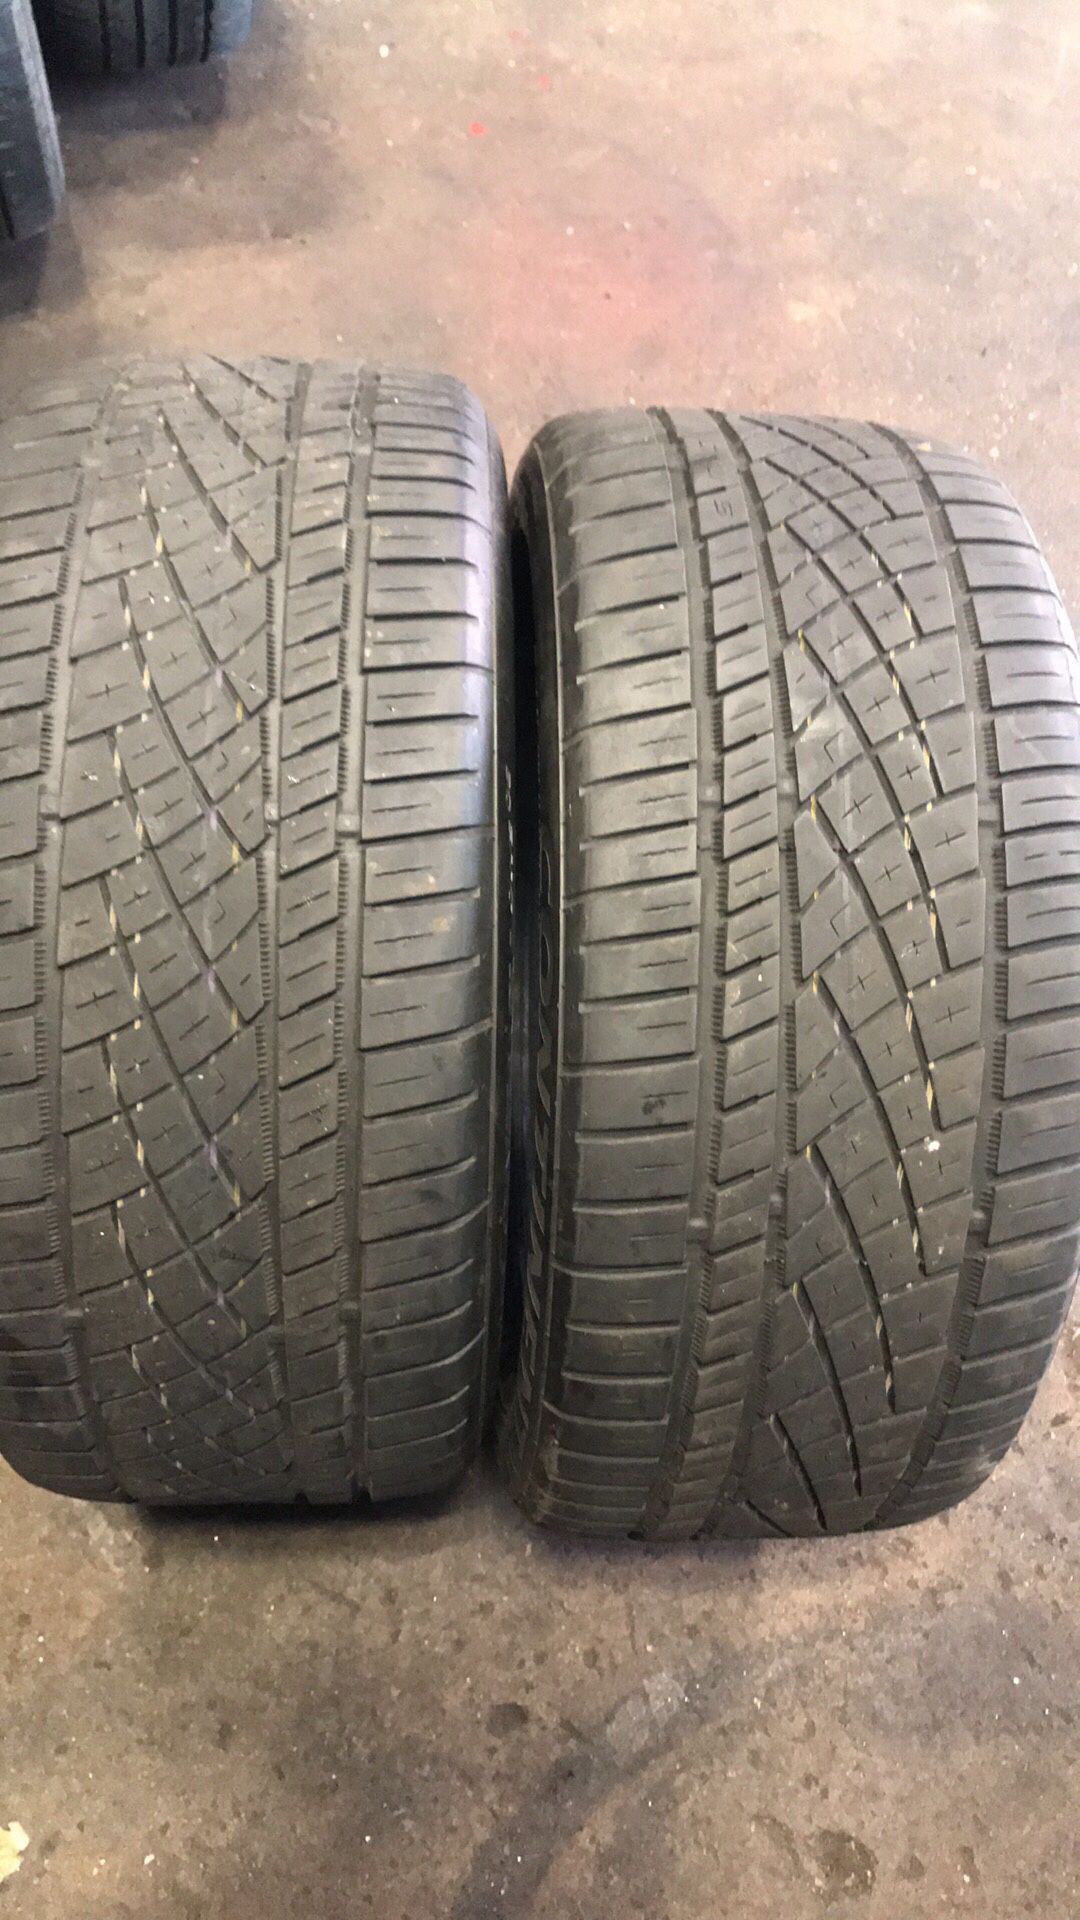 TIRES and Wheels (Used and new) FINANCING Available